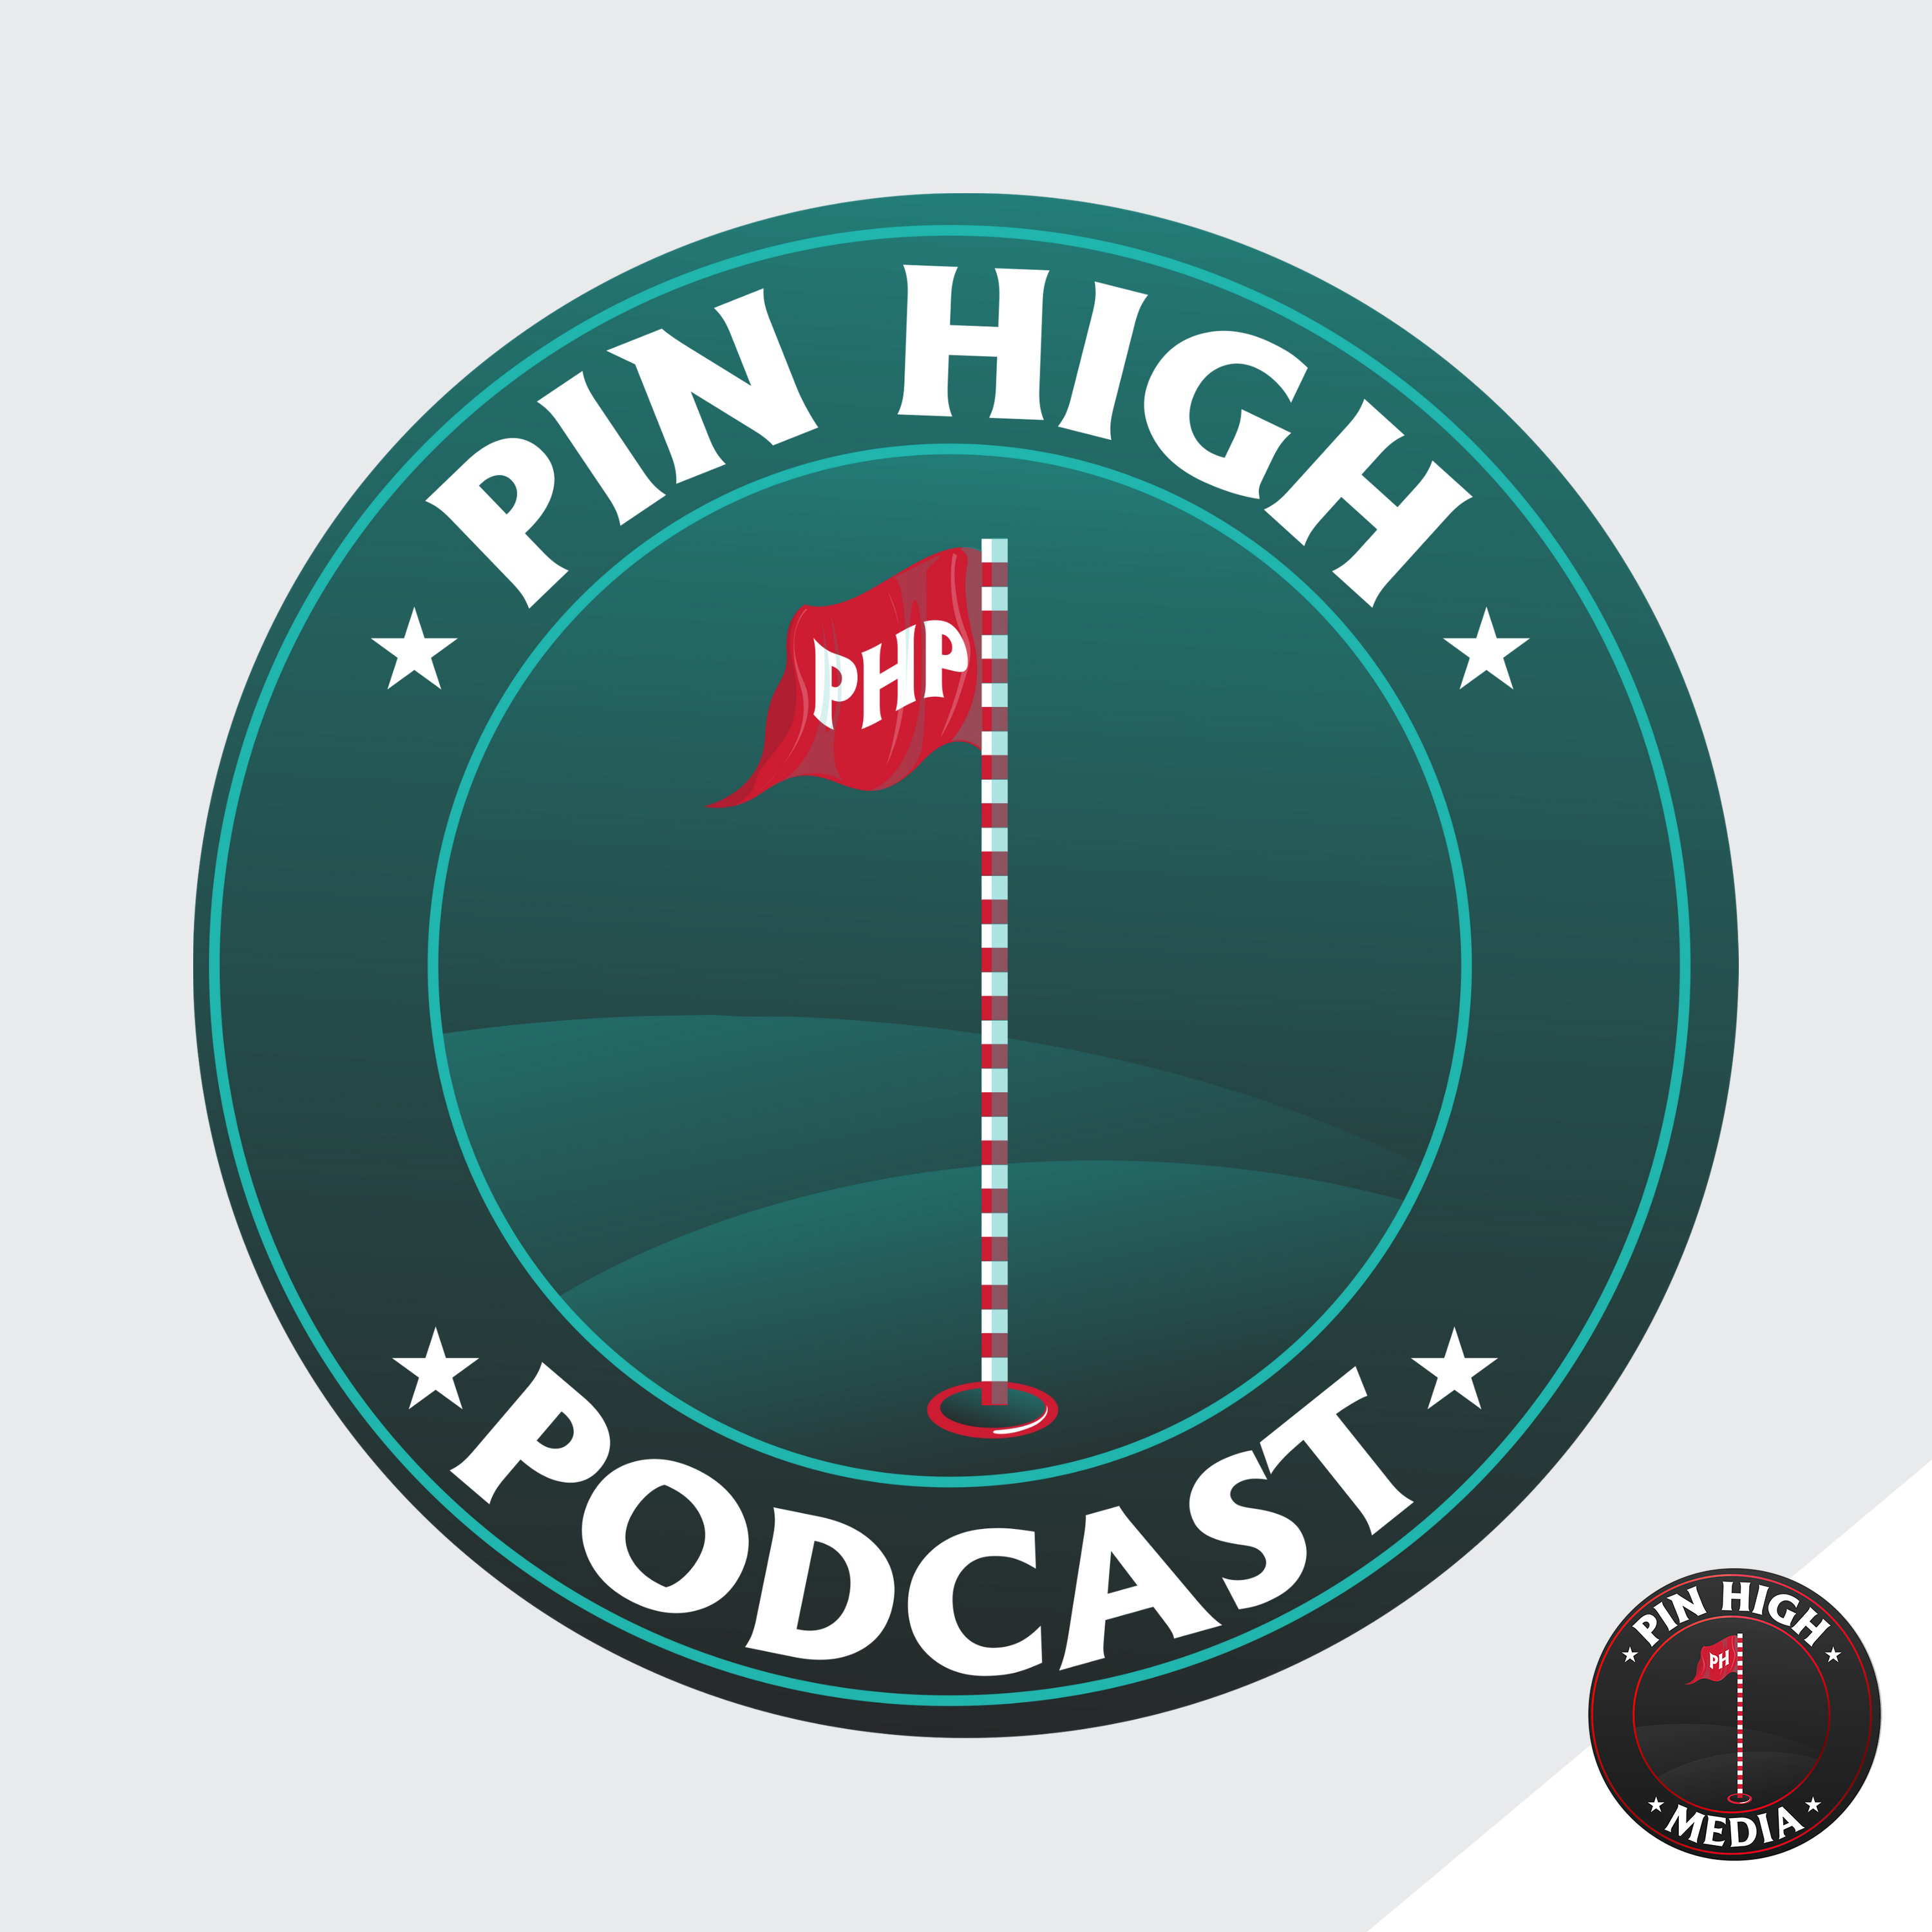 Pin High Podcast Ep. 120: Is the WM Open Good for Golf?